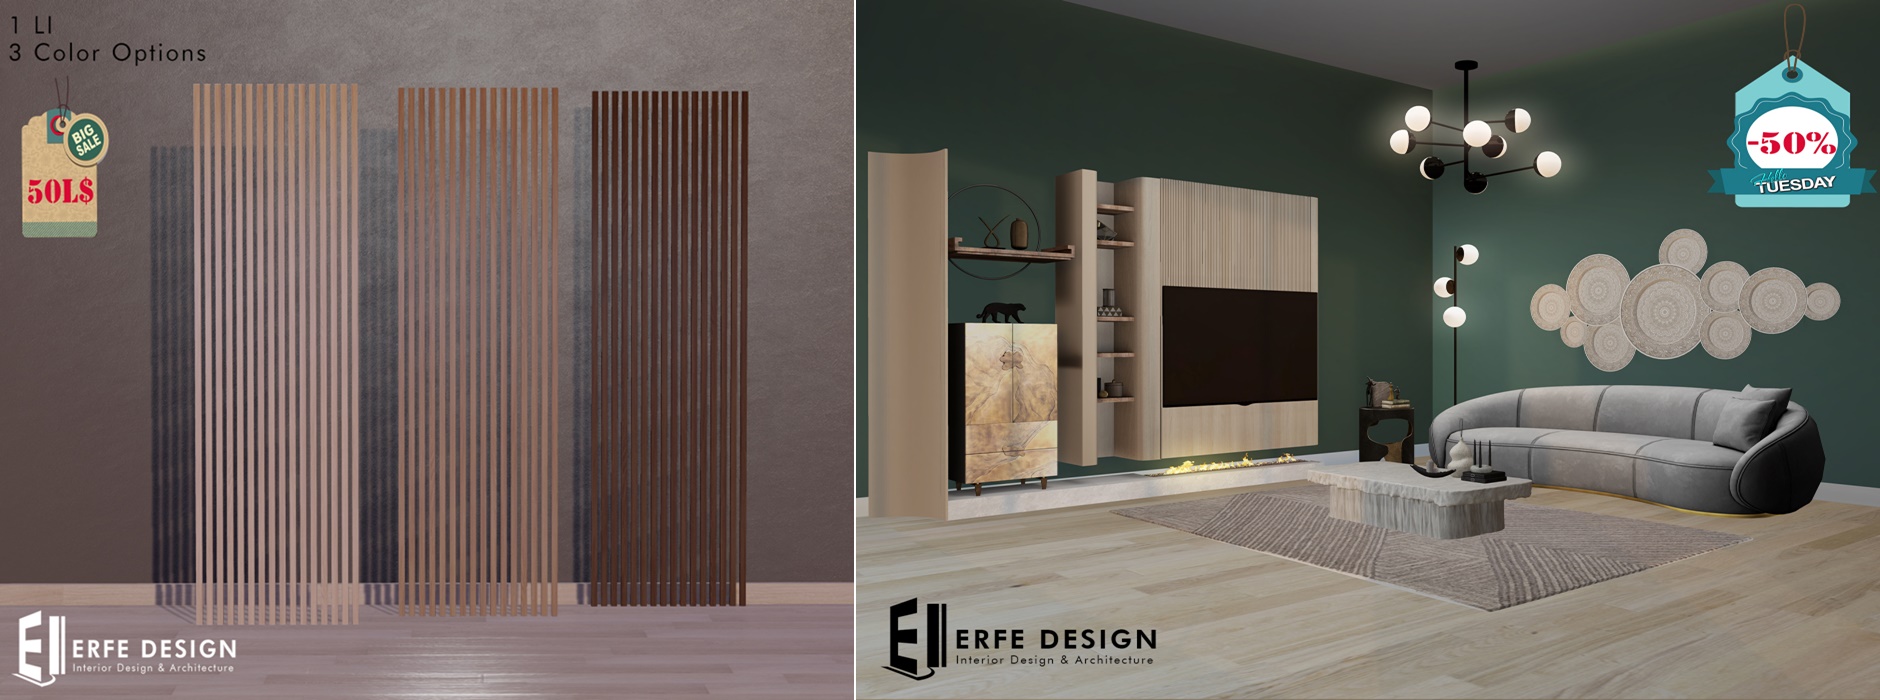 Erfe – Norway Living Room Fatpack and Swann Wall panel